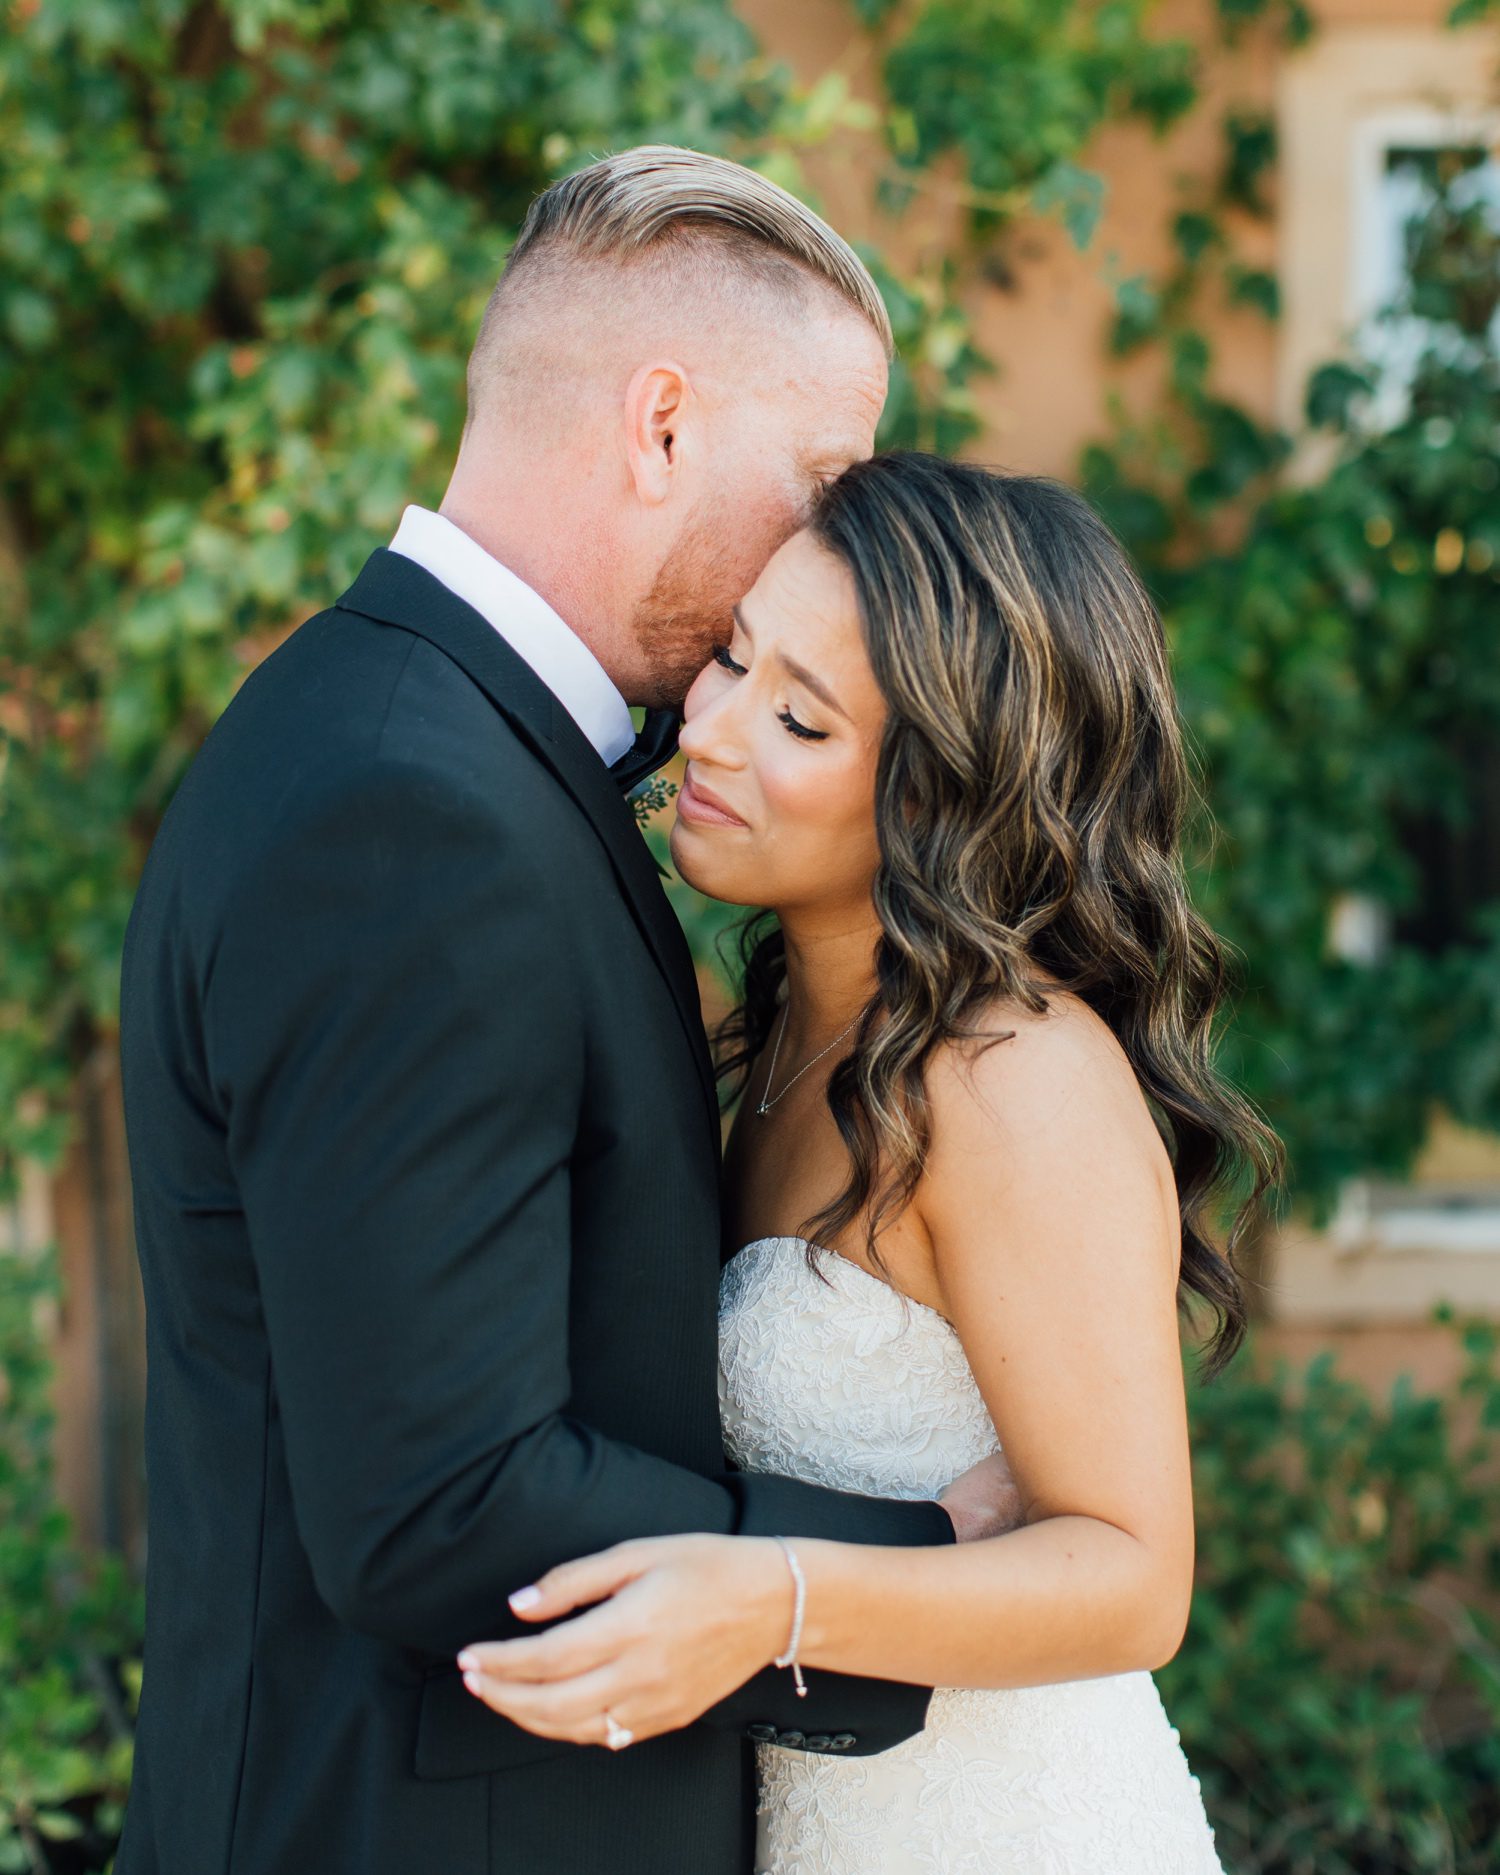 Bride and groom's tearful first look at european chateau inspired wedding in Paso Robles by photographer Jessica Sofranko